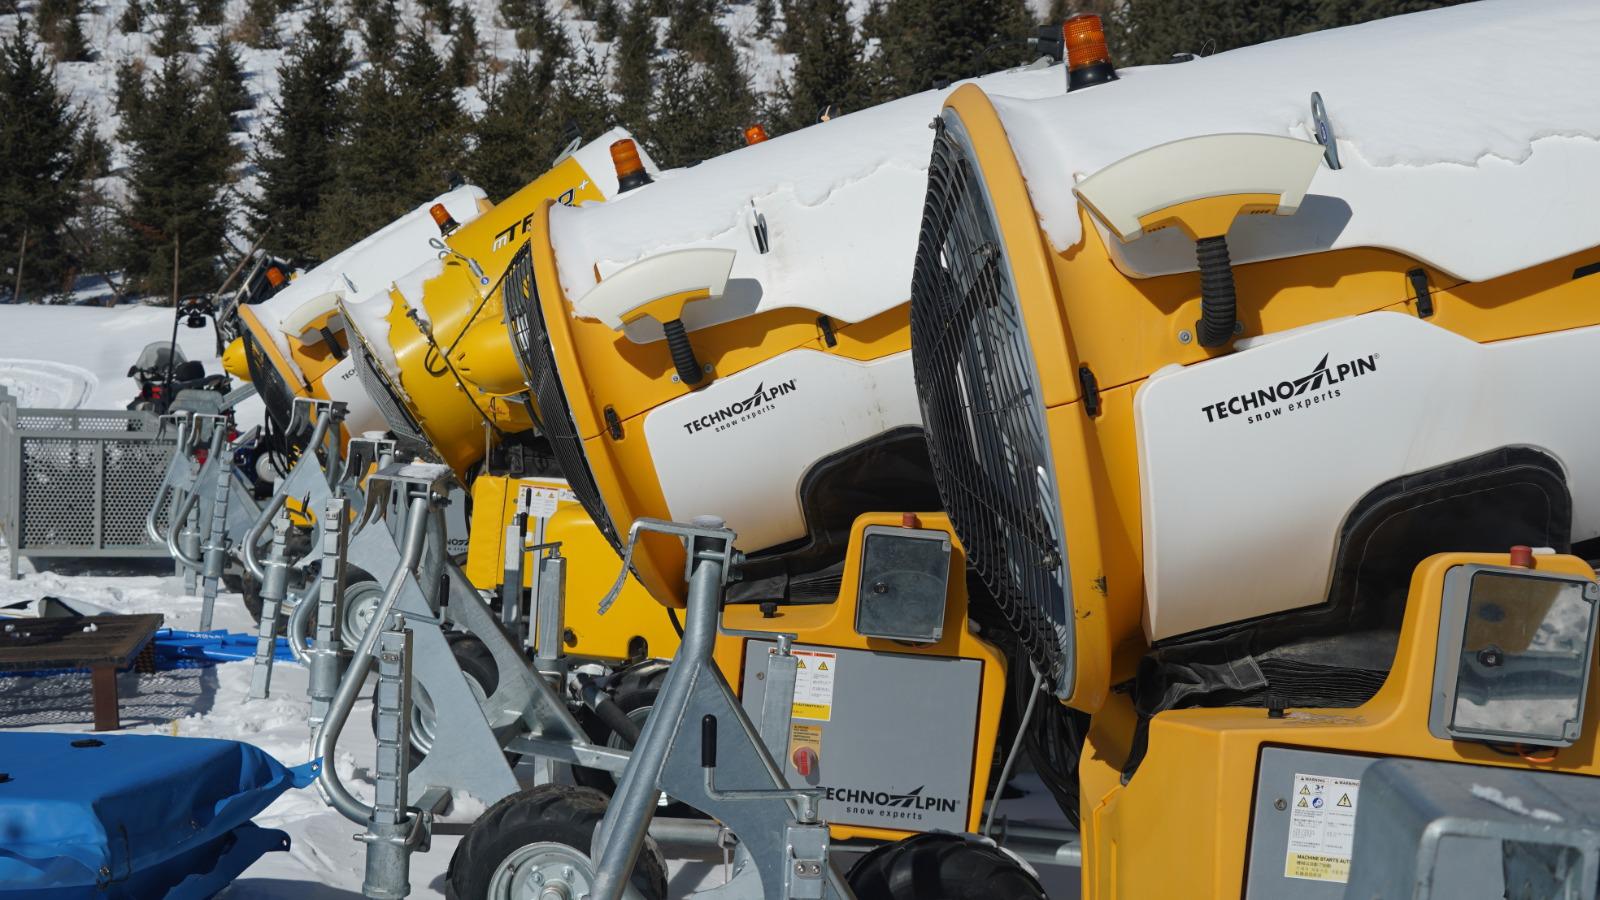 The machines have been on snow duty since 2018